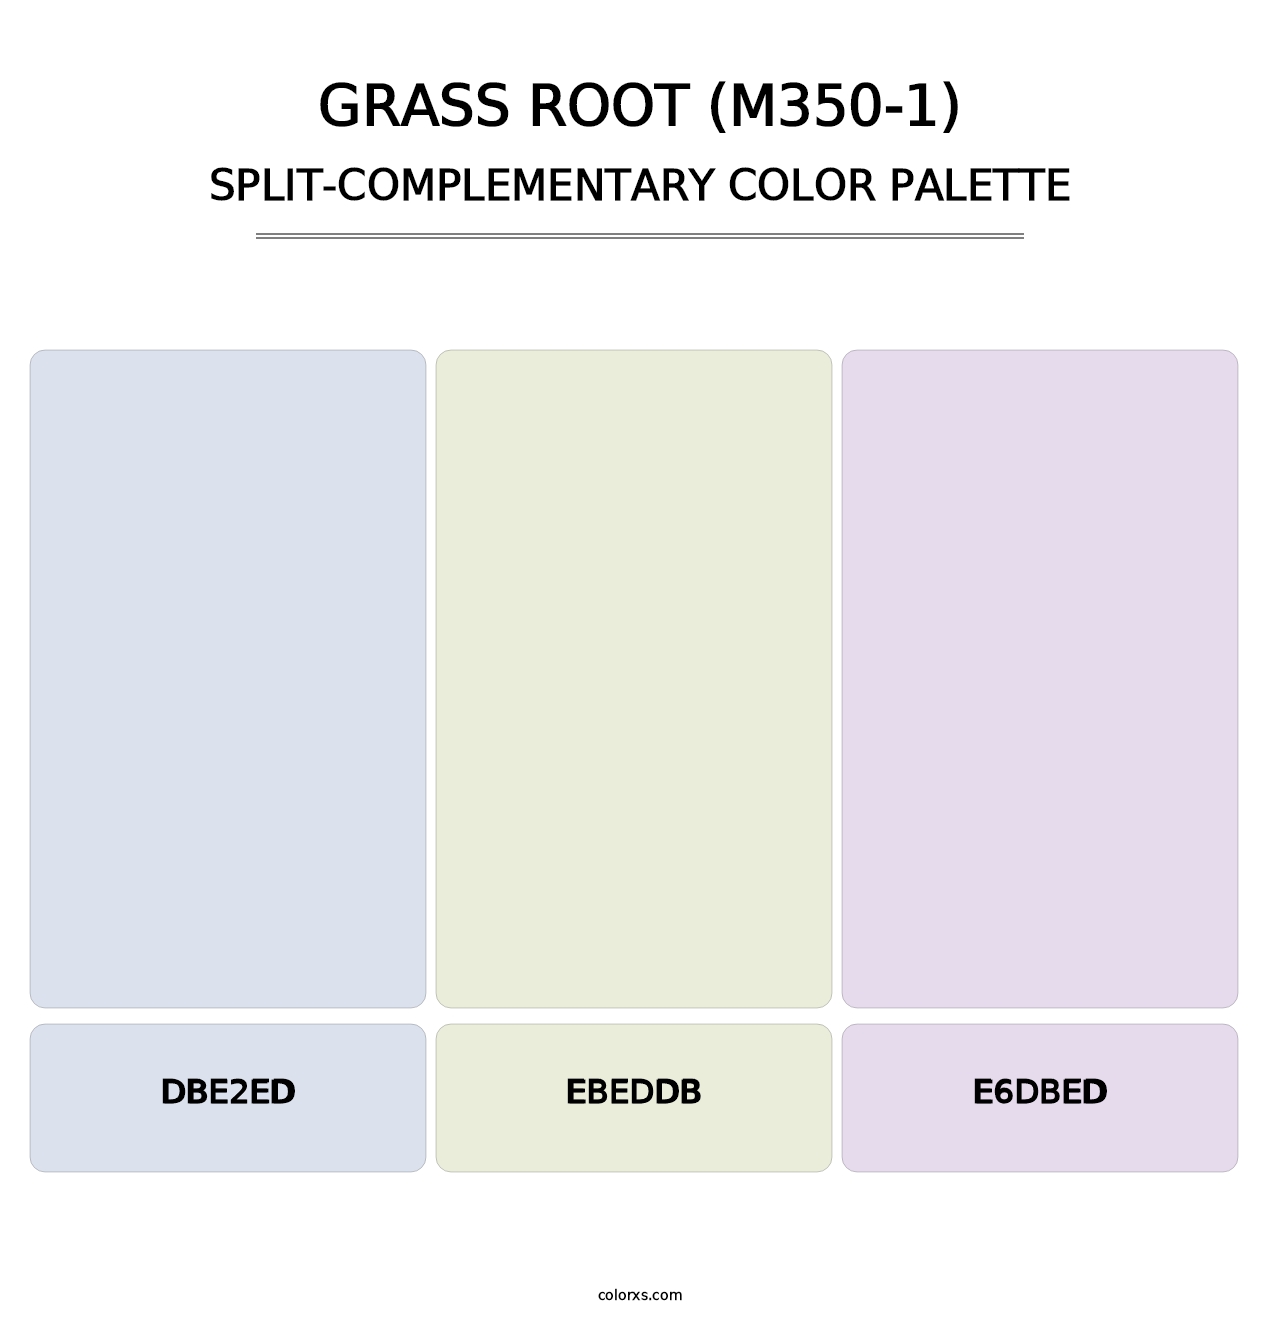 Grass Root (M350-1) - Split-Complementary Color Palette